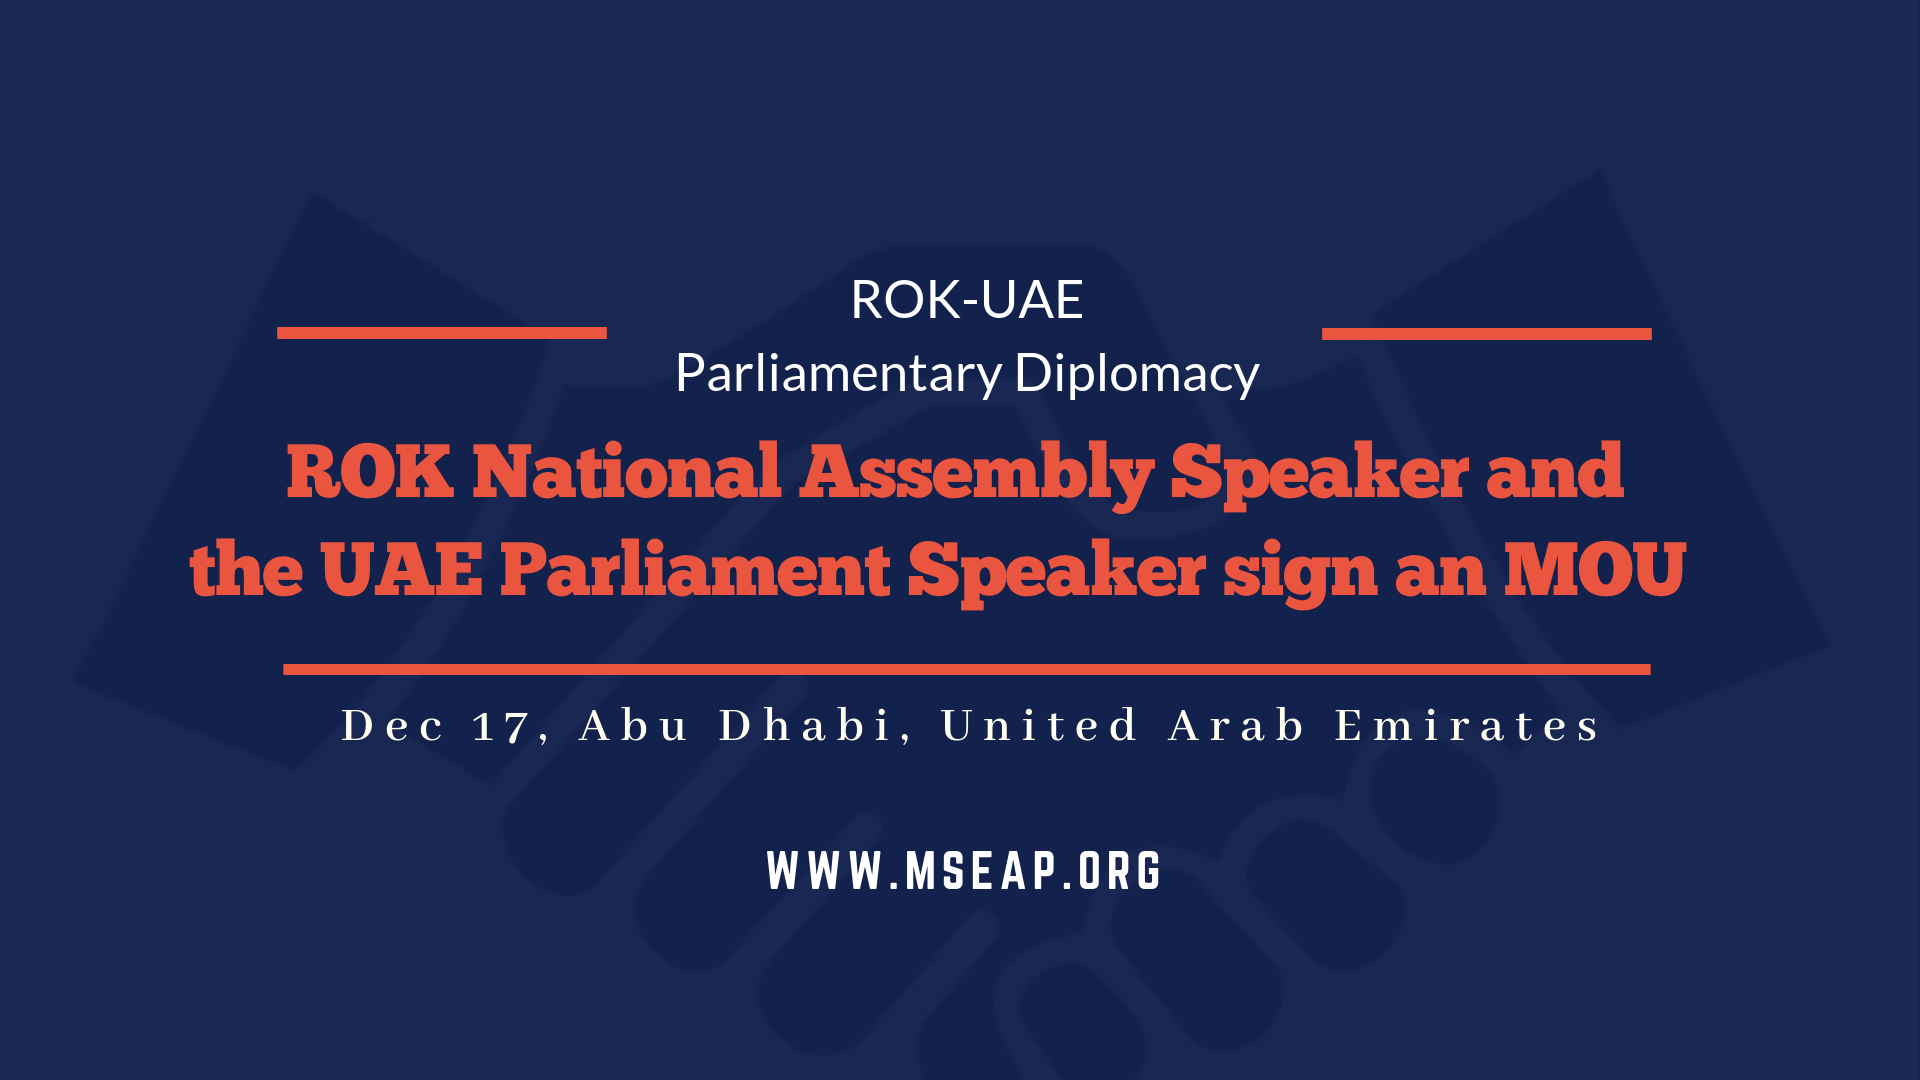 Republic of Korea and the United Arab Emirates sign an interparliamentary cooperation MOU